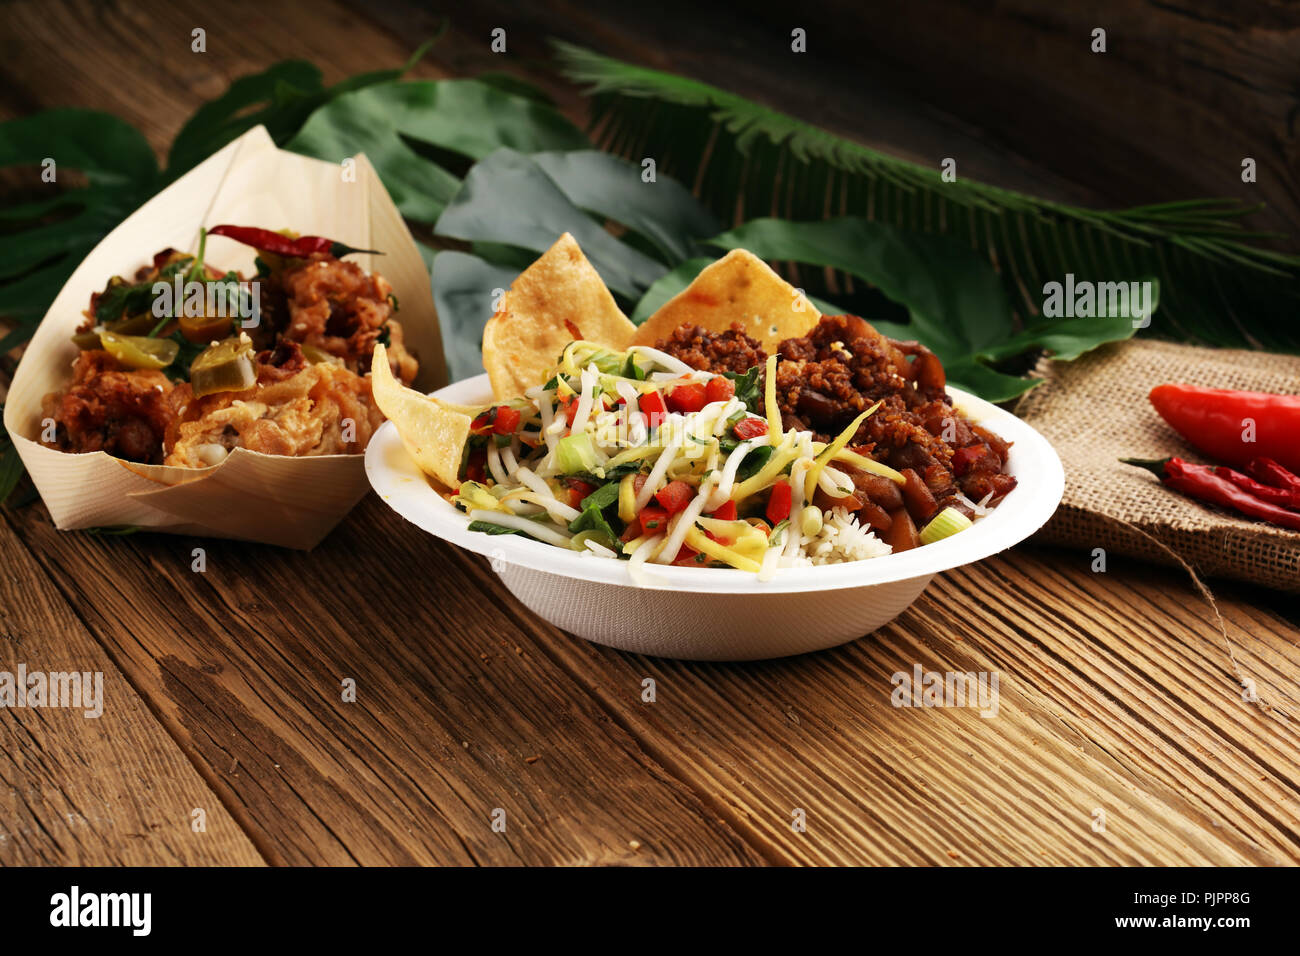 Nasi Campur Bali. Popular Balinese meal of rice with meat. Typical Malaysian street food lunch mixed rice Stock Photo